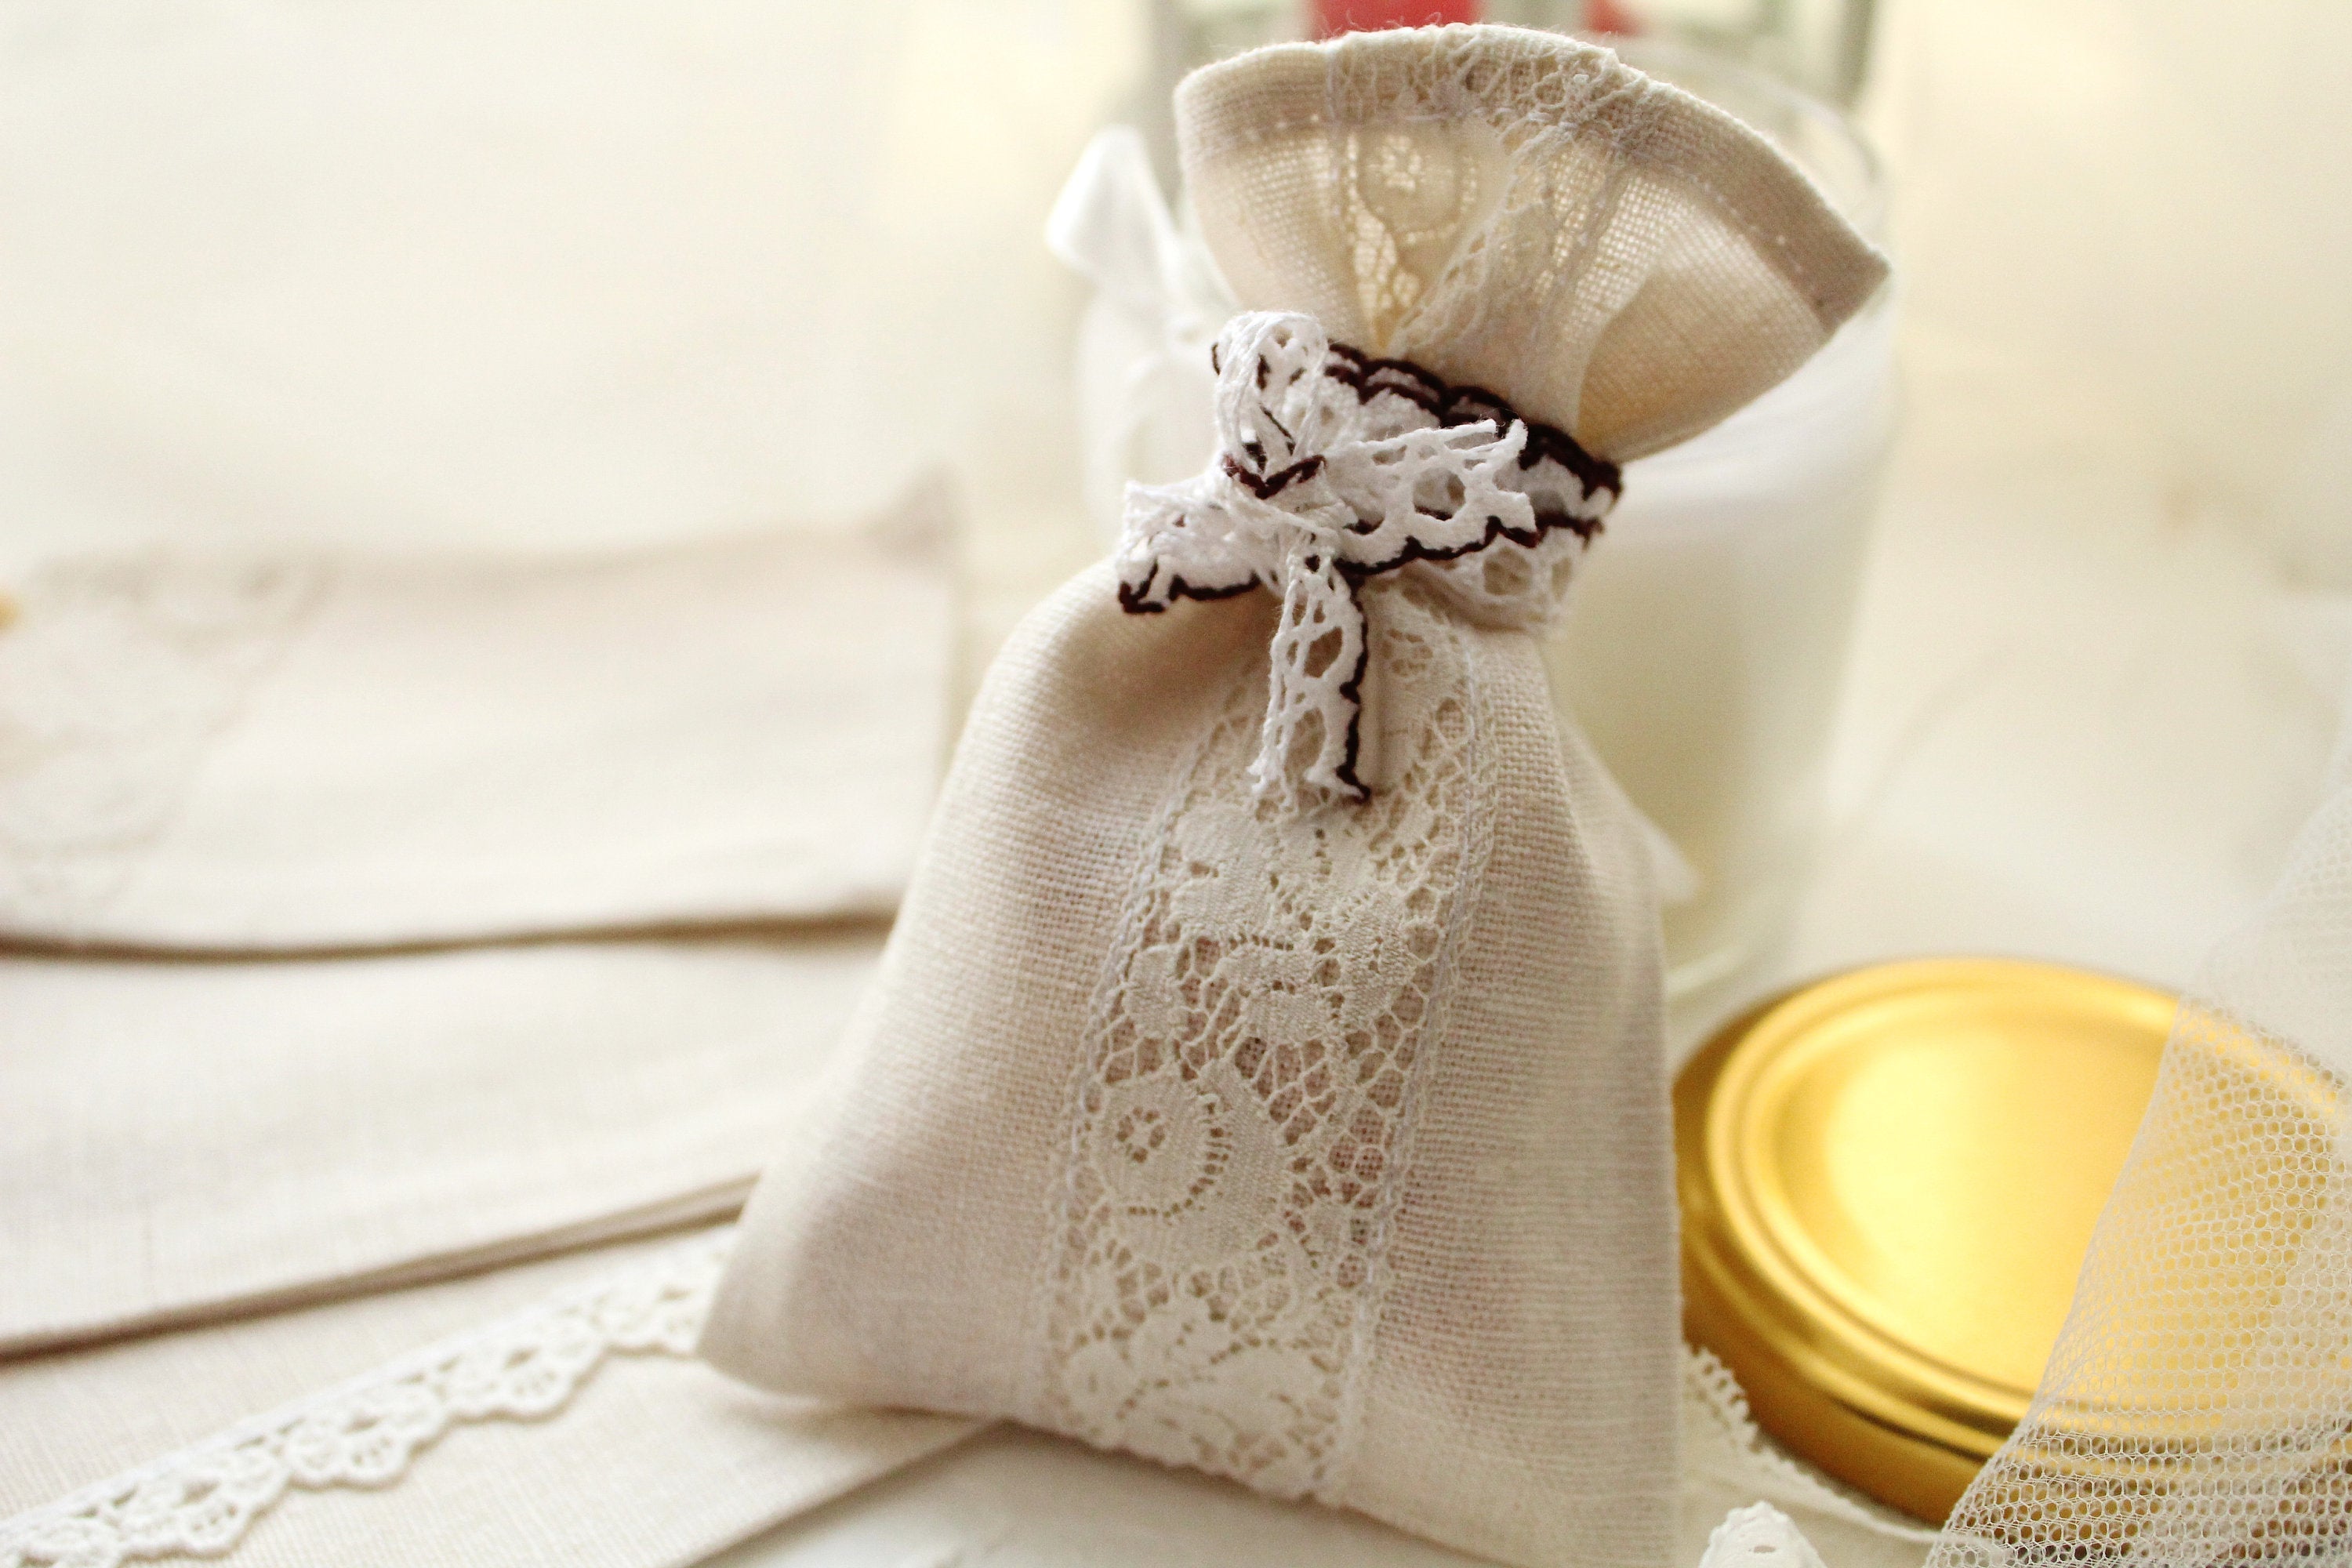 Wedding favor bags for bridal shower, welcome candy, party grifts from natural linen, Different sizes, Highly customizable